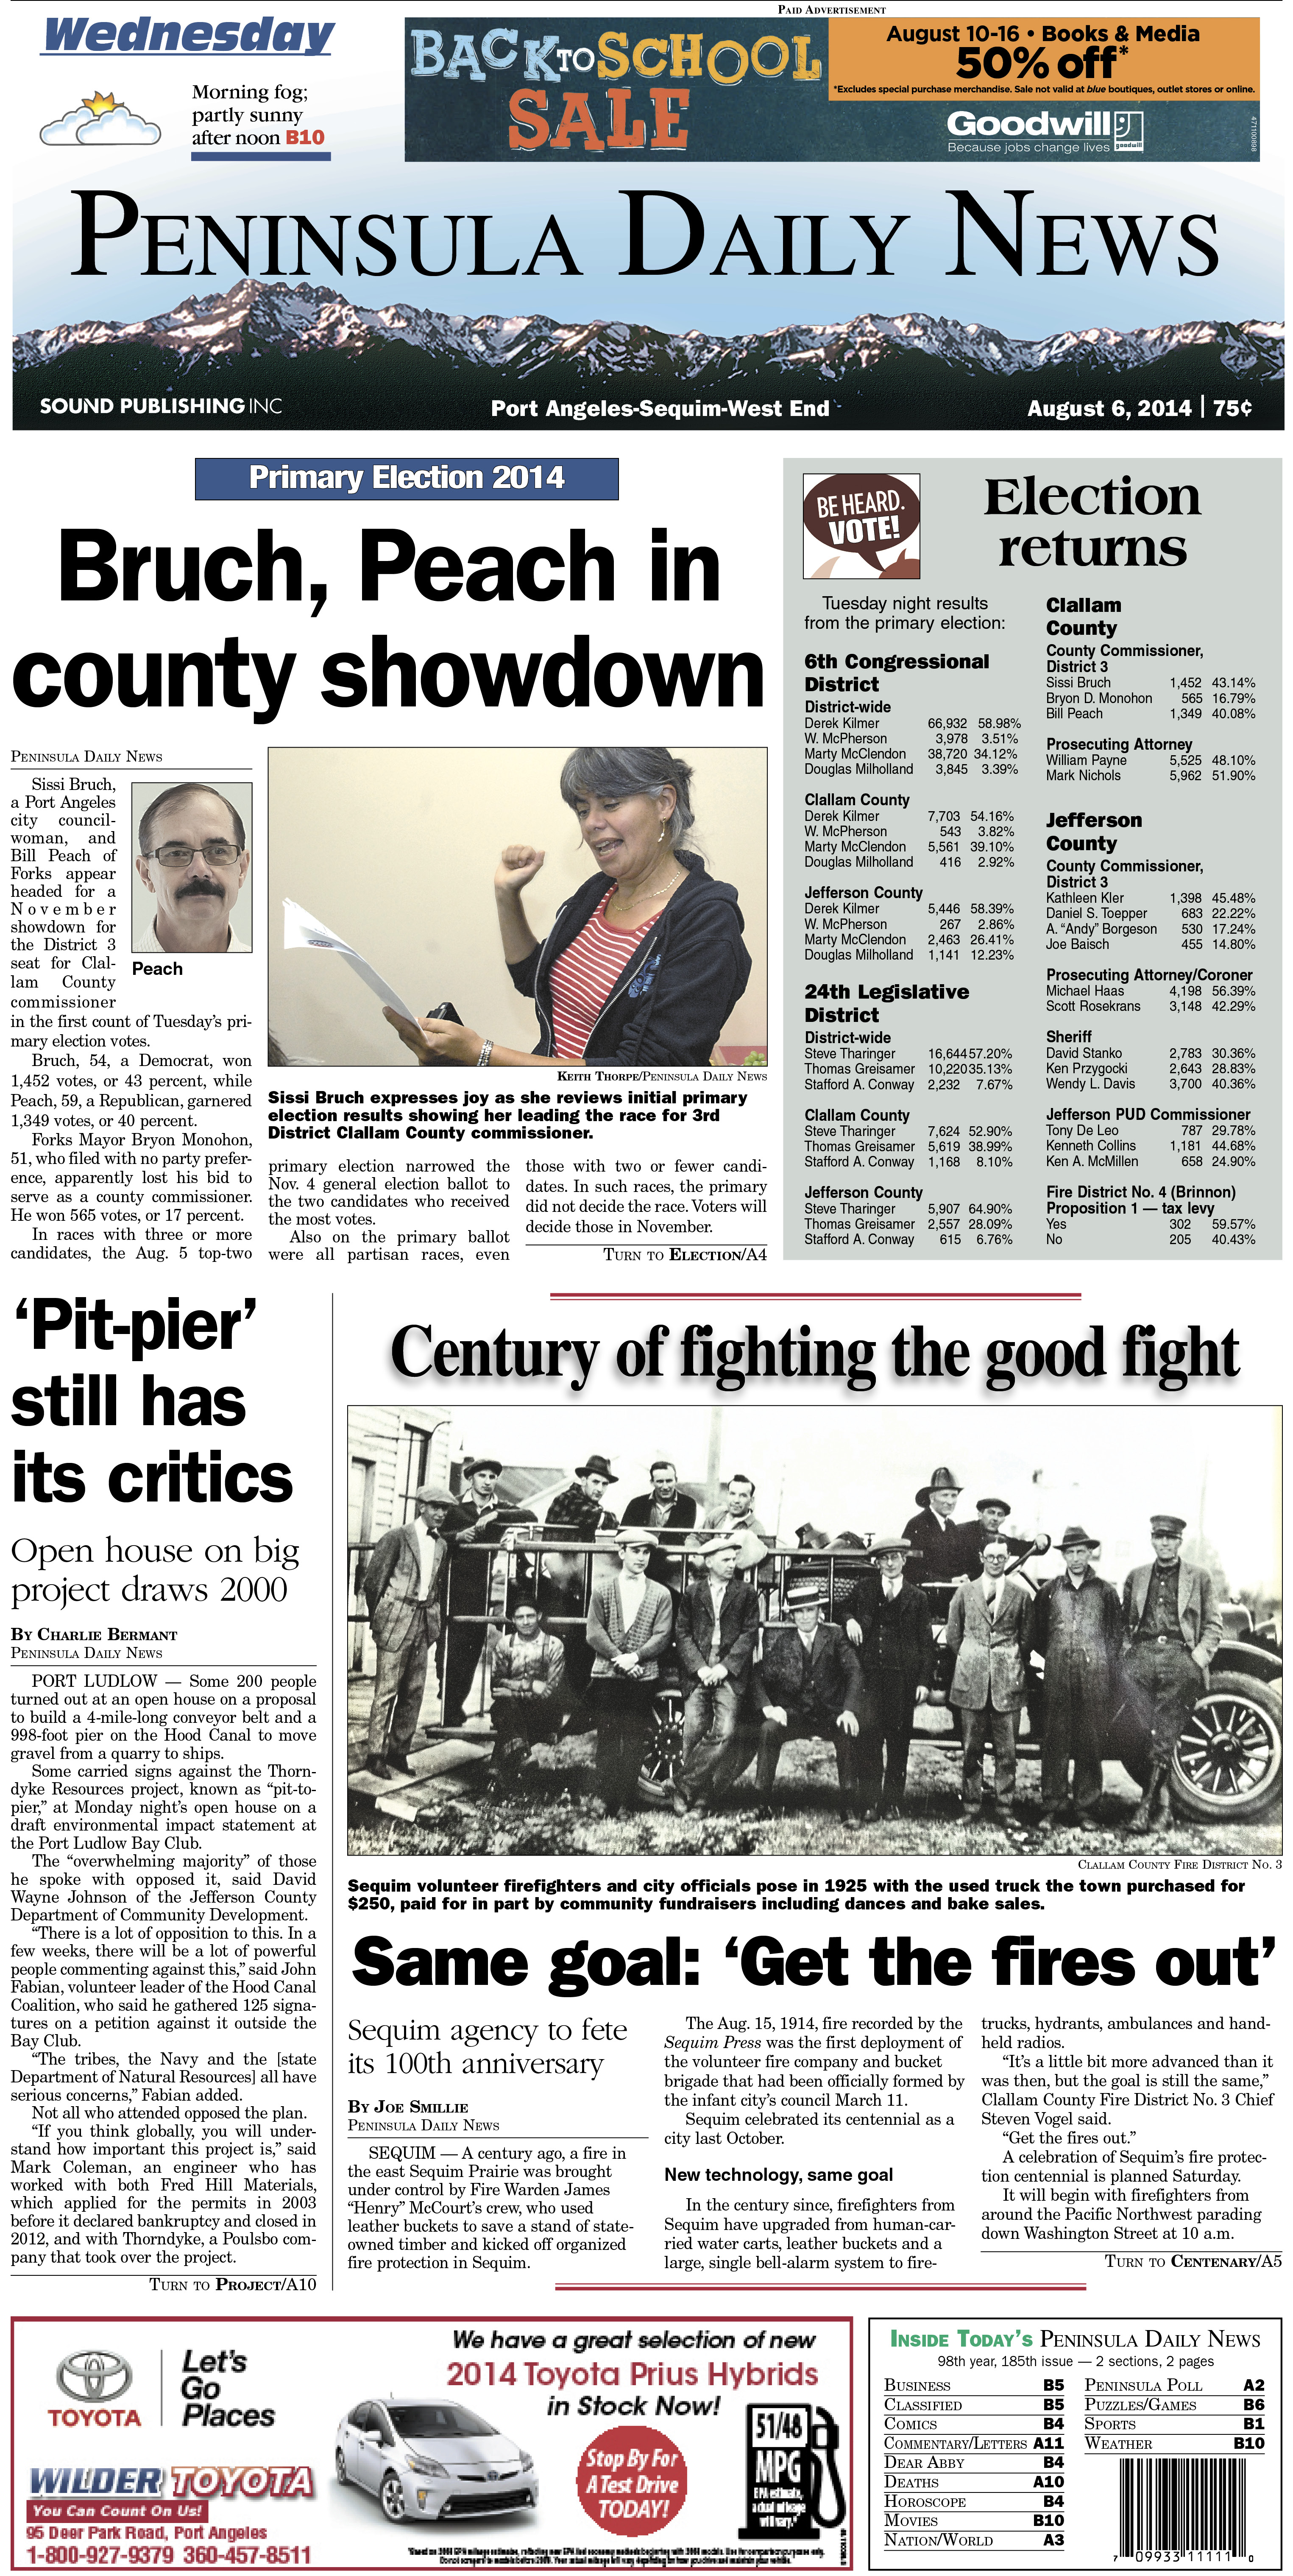 PDN's front page for today's Clallam County readers. There's more inside that isn't online!